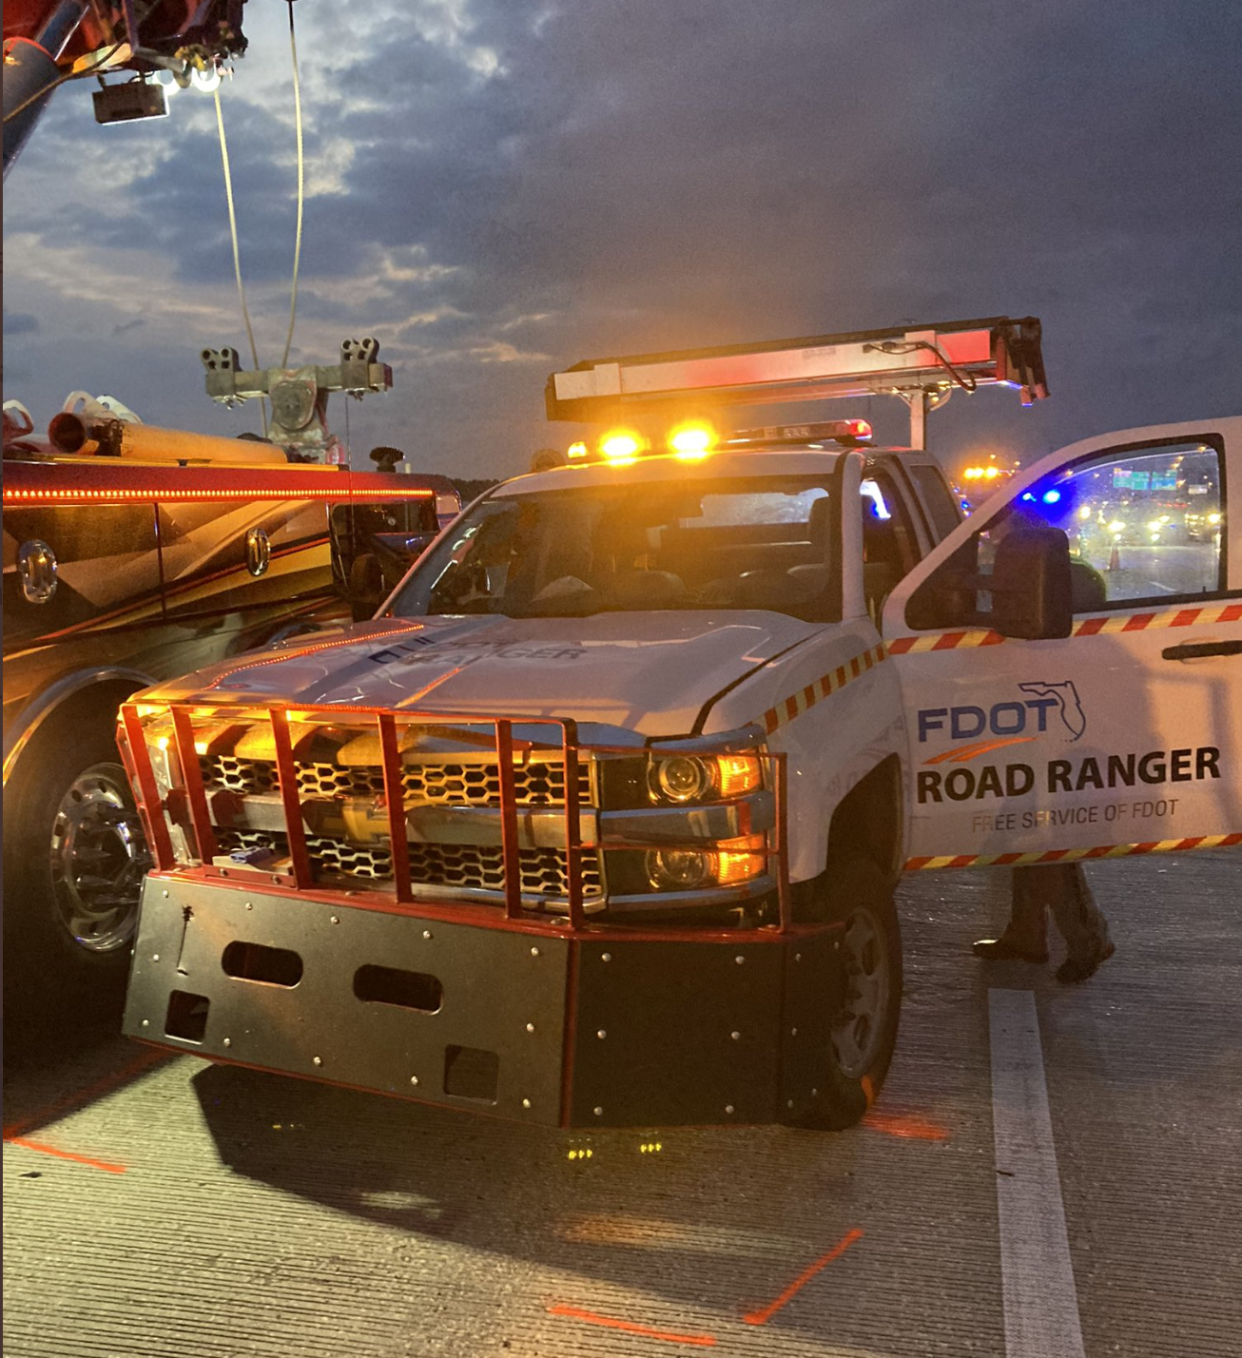 A Florida Department of Transportation Road Ranger remains on scene of a deadly crash after the truck hit another pickup on the Buckman Bridge, knocking it over the barricade into the St. Johns River on Feb. 28 in Jacksonville.